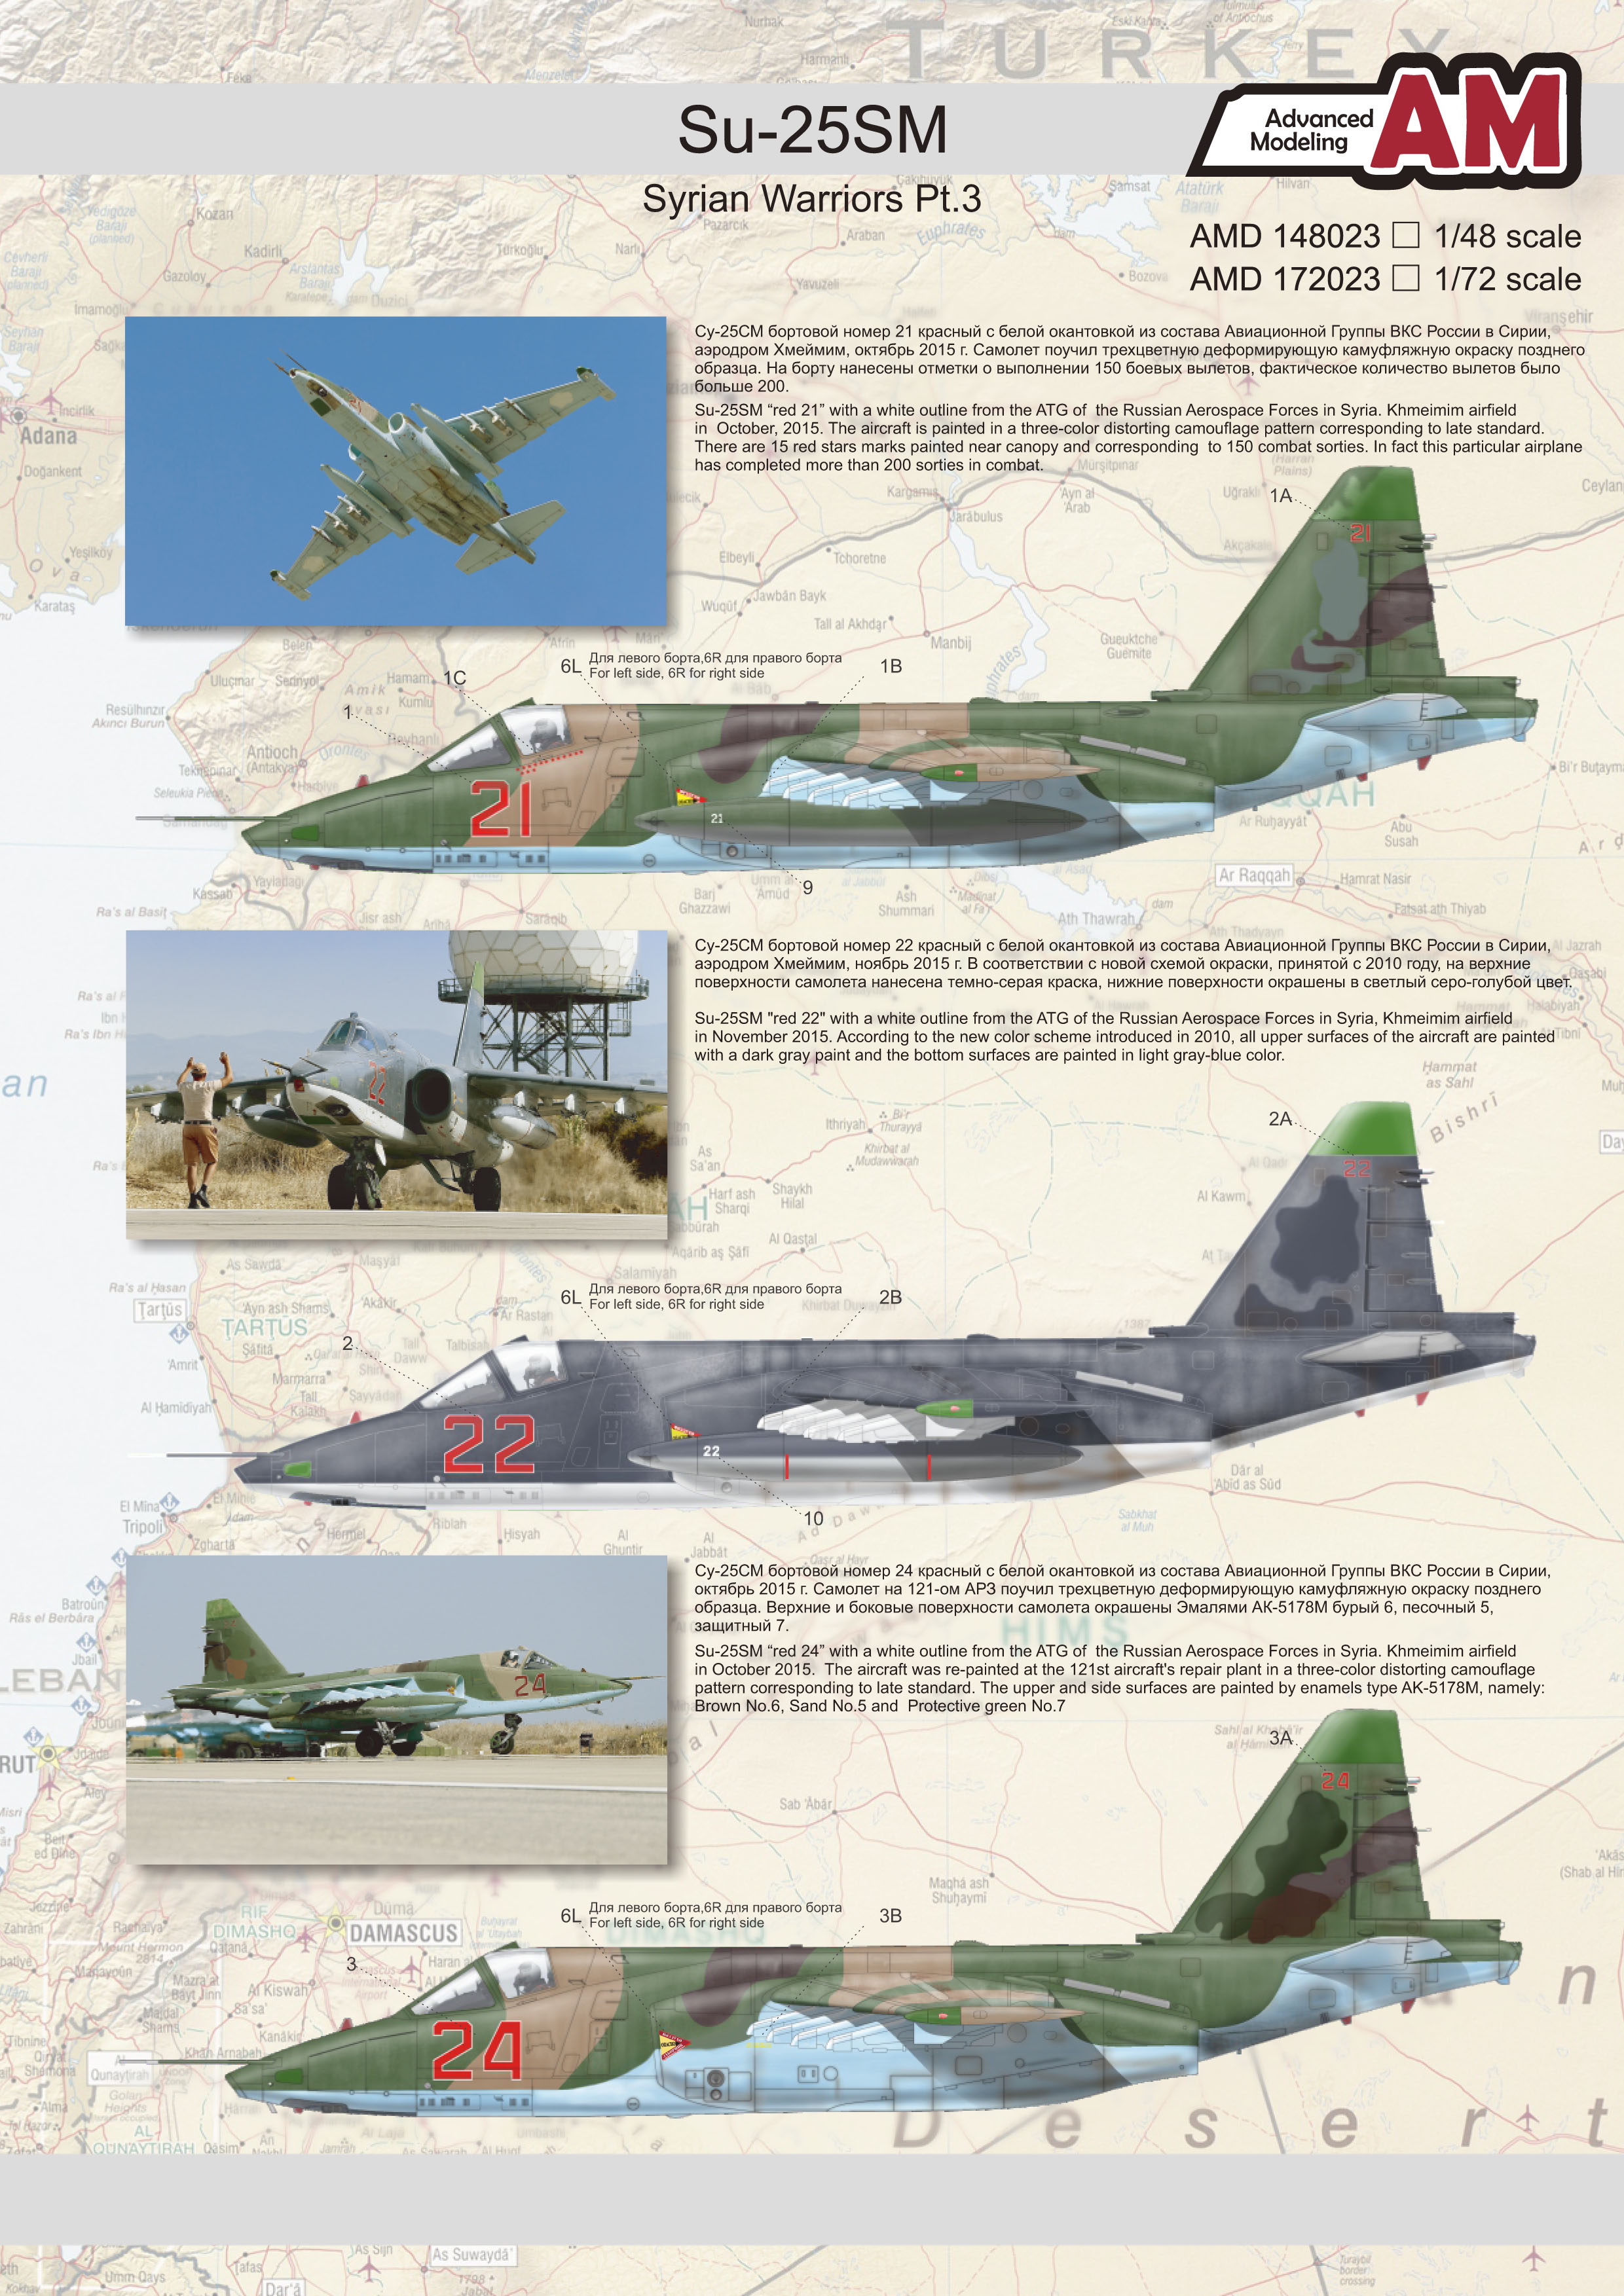 Decal of Su-25 "Syrian Warriors" Pt. 3 (for pre-order with PRE-QNT4001 only)